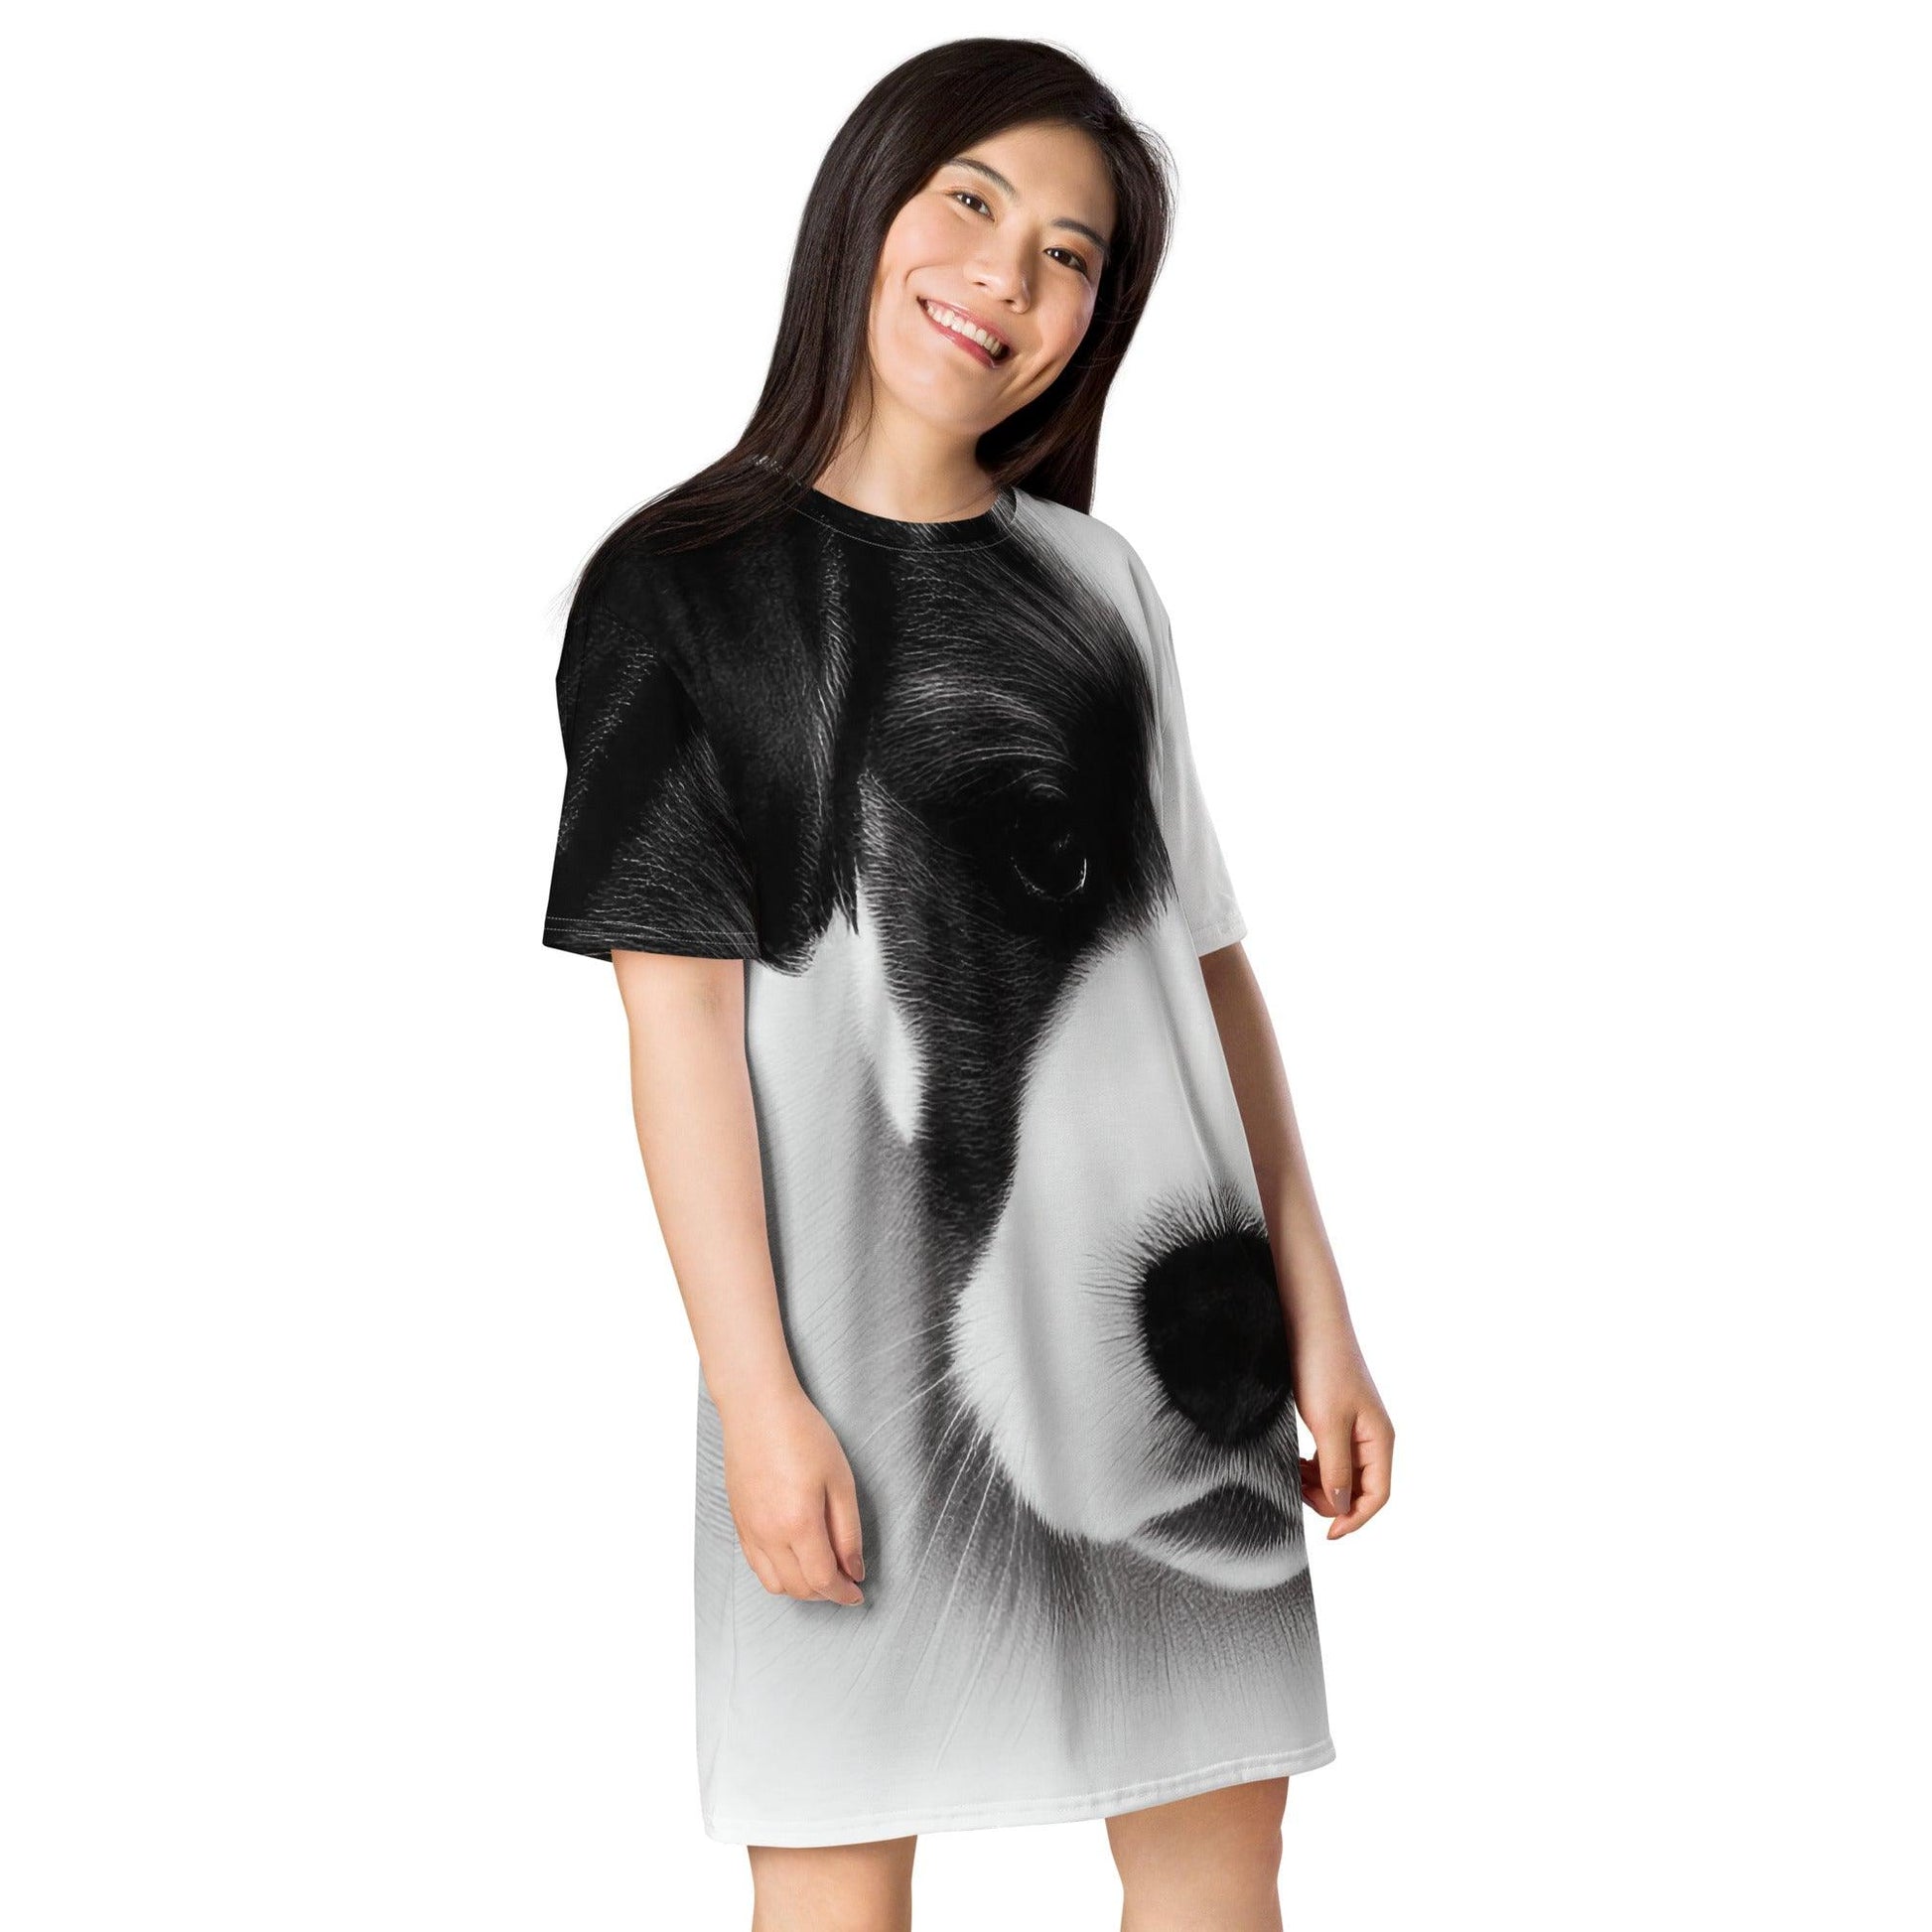 Puppy Love 5 - Womens T-Shirt Dress - iSAW Company